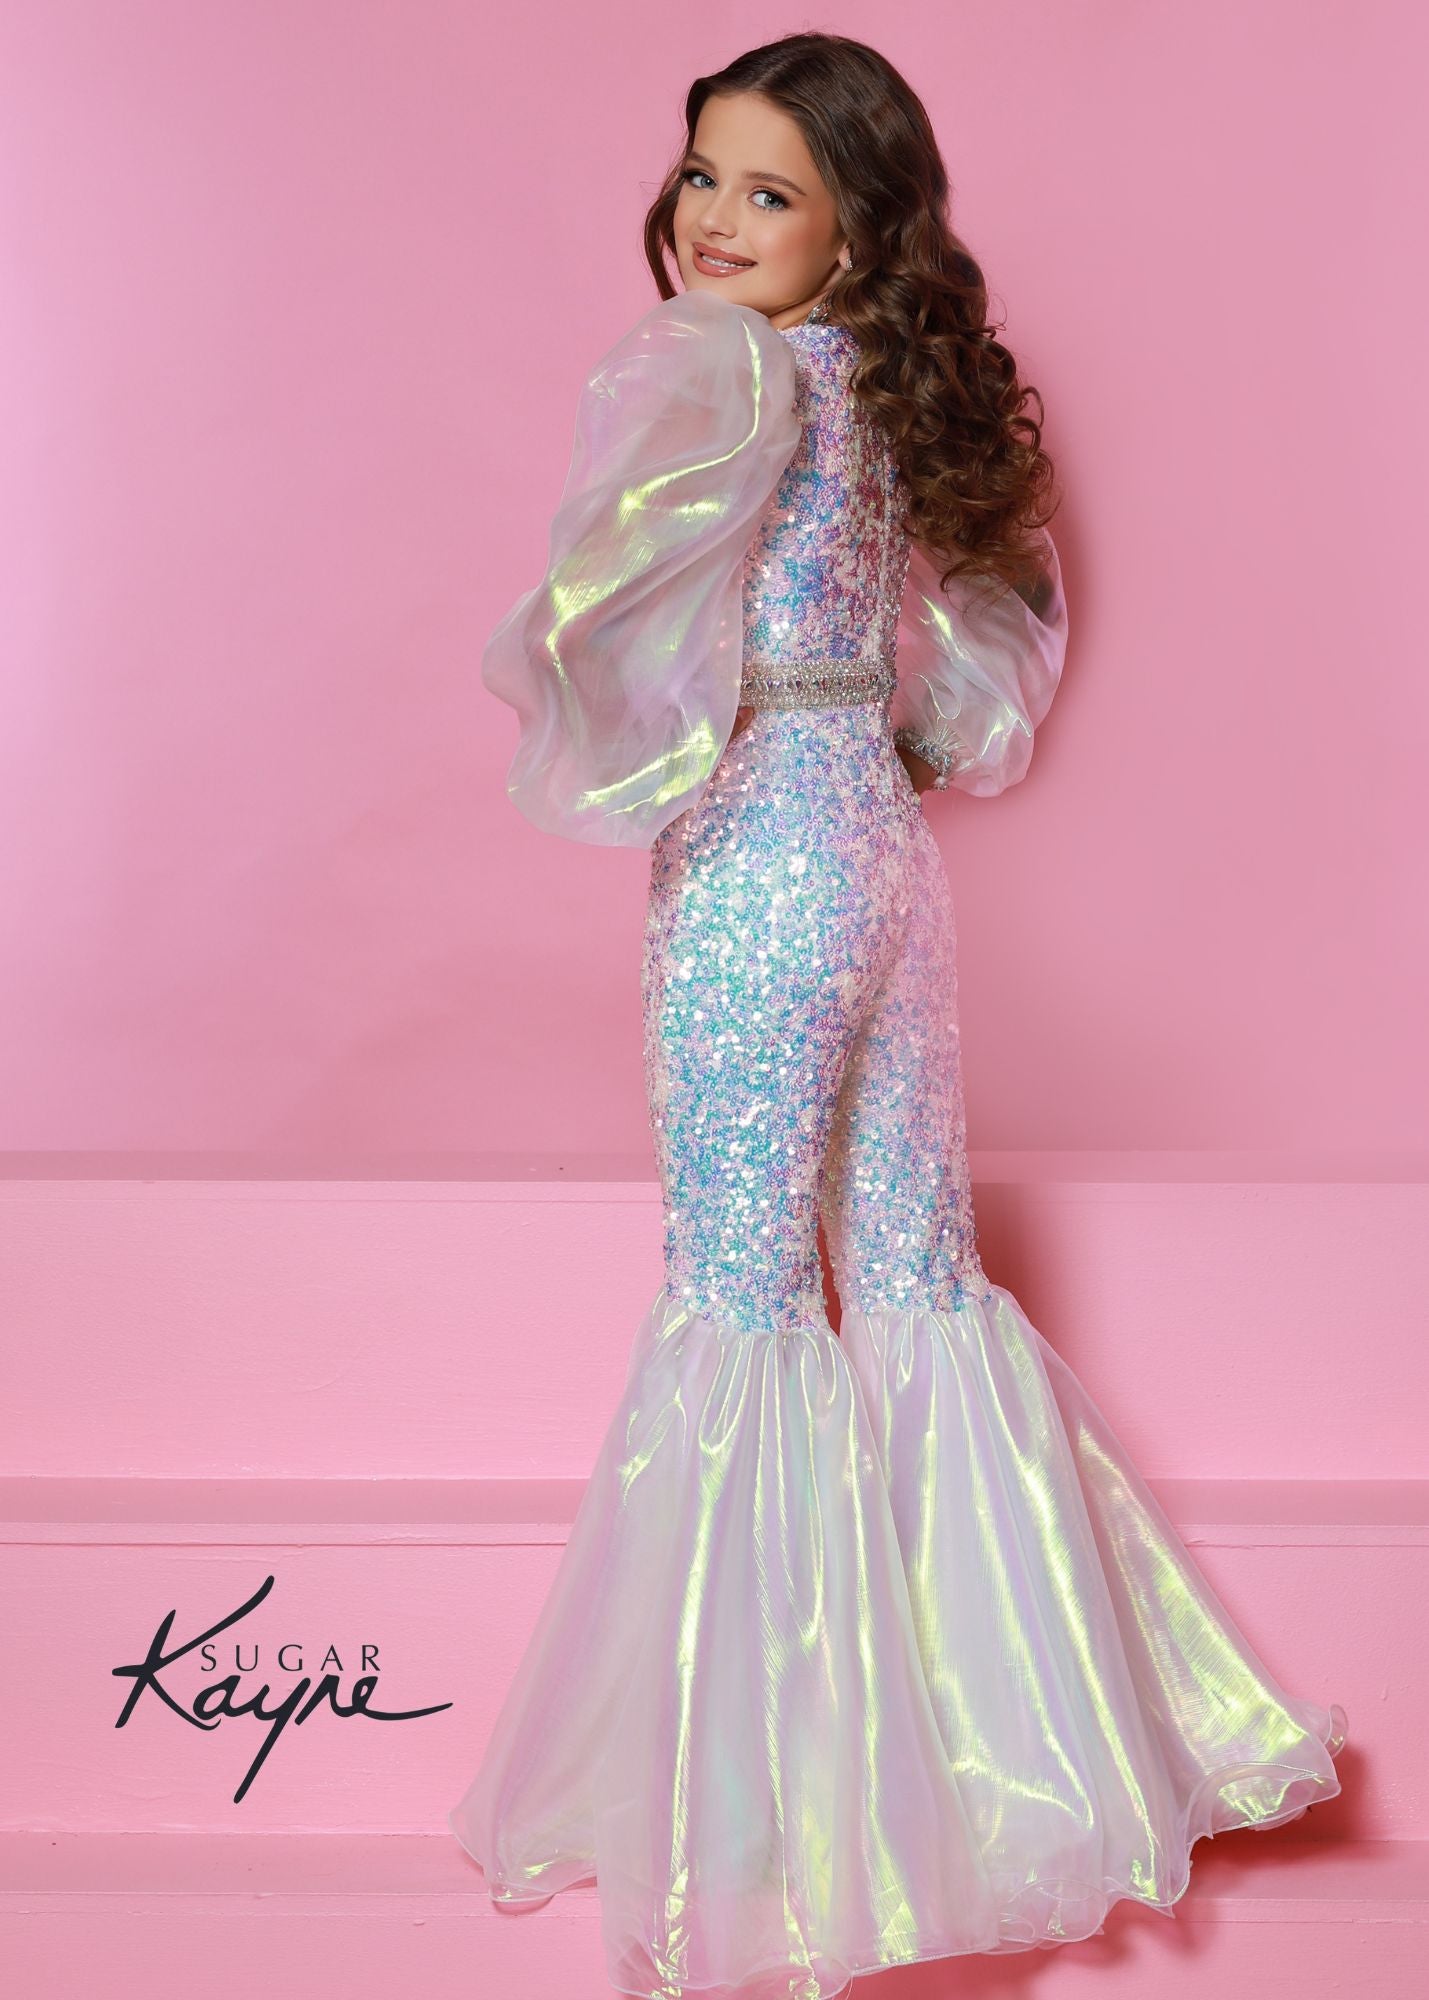 Sugar Kayne C307 Girls Sequin Jumpsuit Bell Bottom Long Sleeve Pageant Fun Fashion Shimmer Product Details Bring back the 70's with this fun fashion bell bottom jumpsuit. The sequin mesh adds the right amount of sparkle to make you glisten on the stage. The look is completed with the iridescent organza puff sleeves.  Colors: Aqua, Pink, White  Sizes: 2, 4, 6, 8, 10, 12, 14, 16  Fabric Sequin Mesh, Stretch Lining, Iridescent Organza